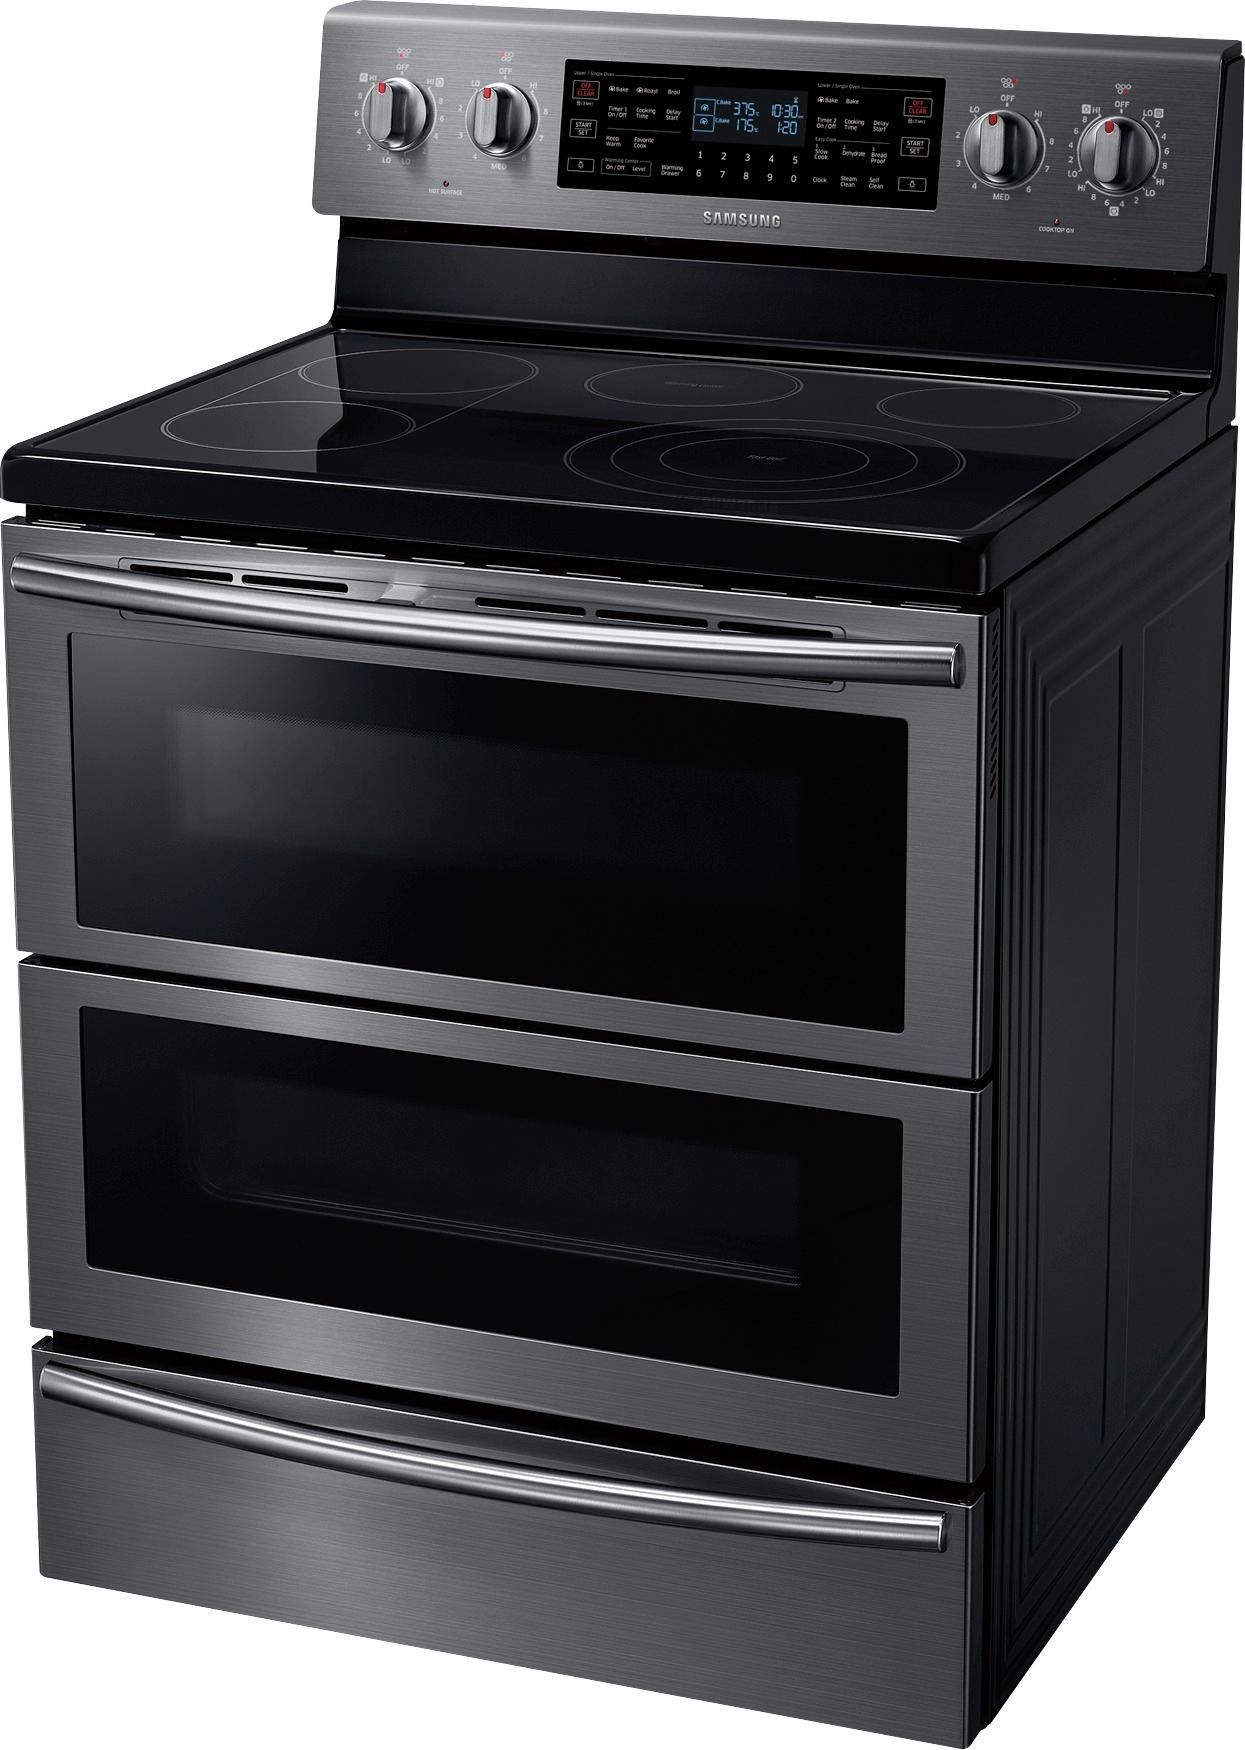 Left View: Samsung - Flex Duo™ 5.9 Cu. Ft. Self-Cleaning Freestanding Fingerprint Resistant Double Oven Electric Convection Range - Black Stainless Steel